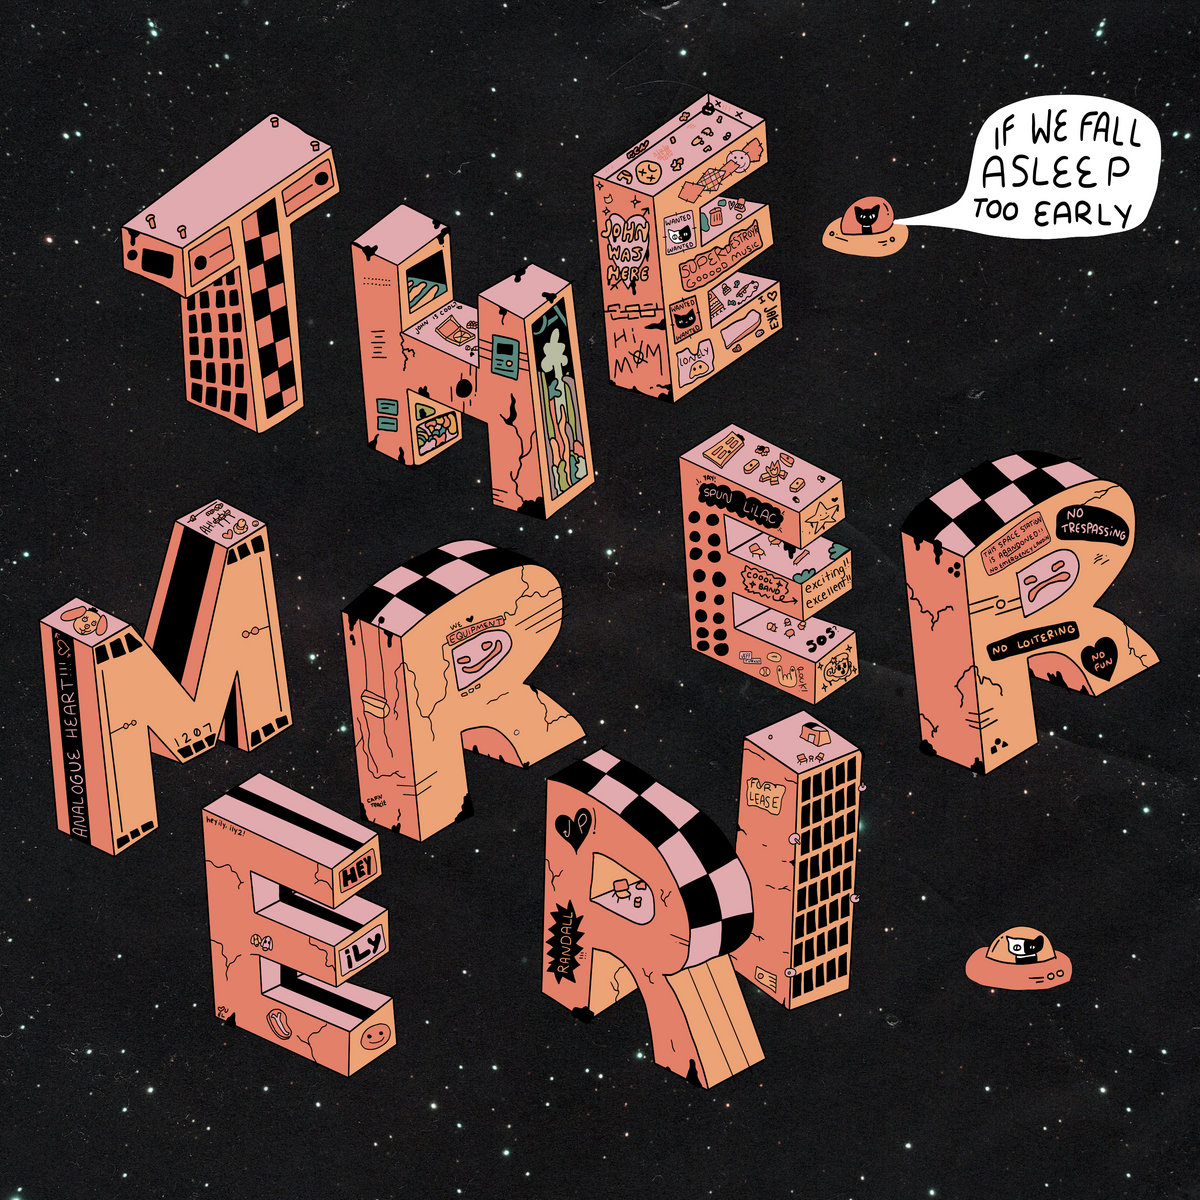 Introducing: The Merrier – If We Fall Asleep Too Early & Interview